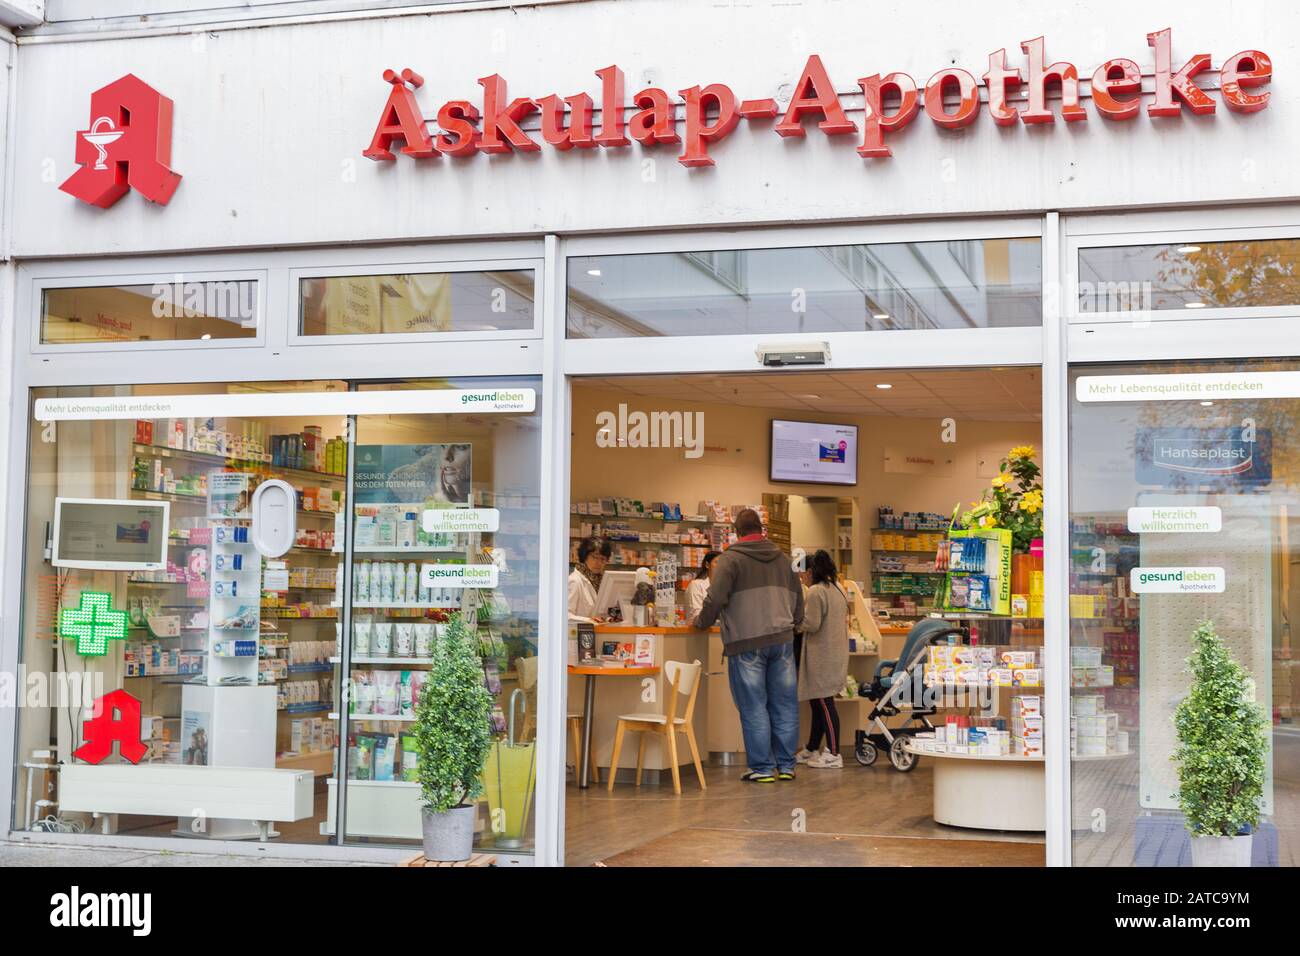 BERLIN, GERMANY - NOVEMBER 18, 2019: People visit Gesundleben Askulap-Apotheke pharmacy in Markisches Trade Center. Berlin is the capital and largest Stock Photo